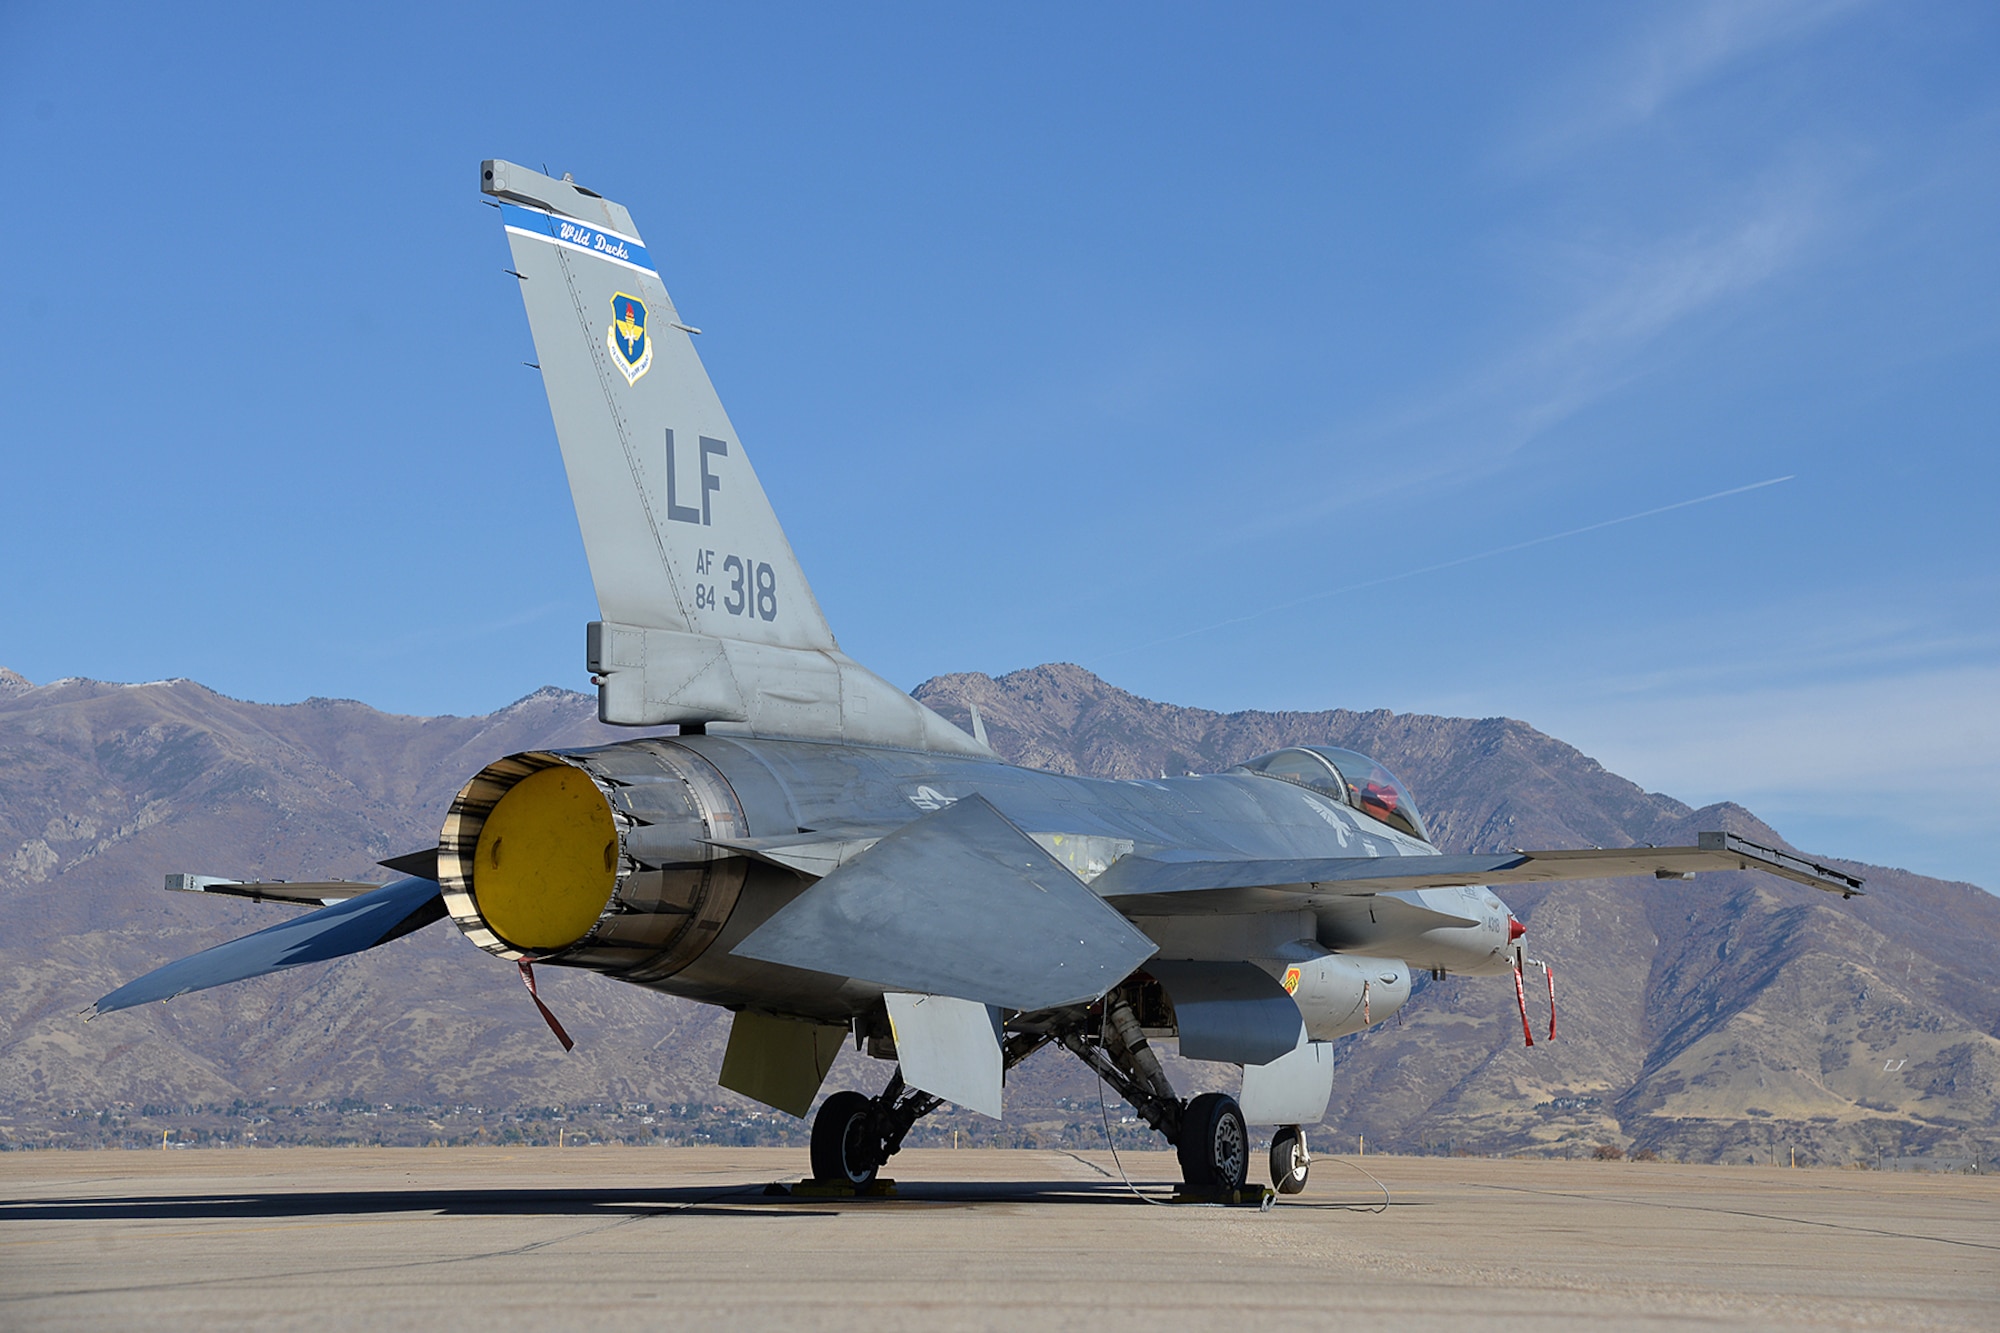 An F-16 Fighting Falcon on the ramp following a functional check flight Nov. 9, 2018, at Hill Air Force Base, Utah. The 573rd Aircraft Maintenance Squadron completed an F-16 modification line known as the ‘3 Amigos’ on more than 300 F-16s from March 2013 to November 2018. The modifications primarily consisted of three structural Time Compliance Technical Order modifications and incorporated concurrent electrical modifications that included updates to the center display unit, helmet mounted integrated targeting, and beyond line-of sight communication. (U.S. Air Force photo by Alex R. Lloyd